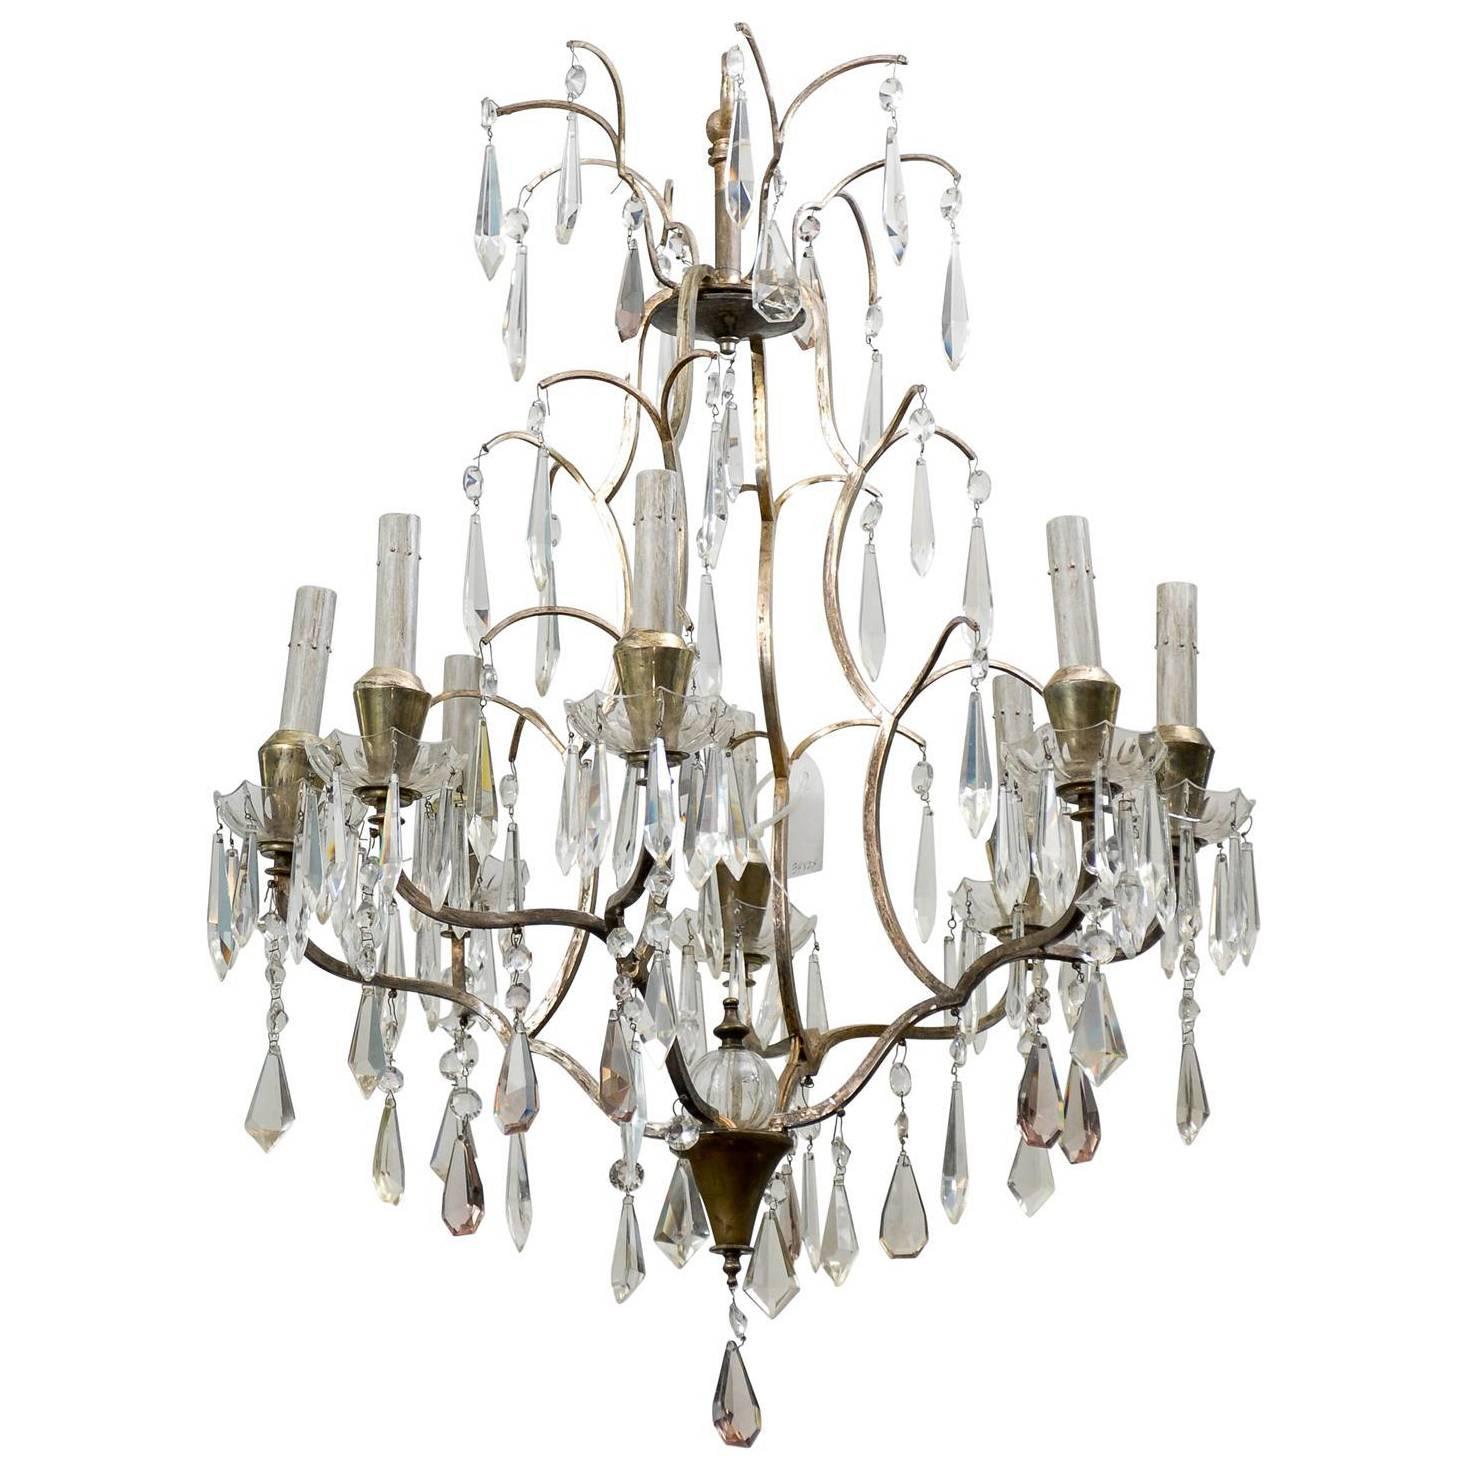 Swedish Eight-Light Crystal Chandelier with Brass Armature, Rewired for US